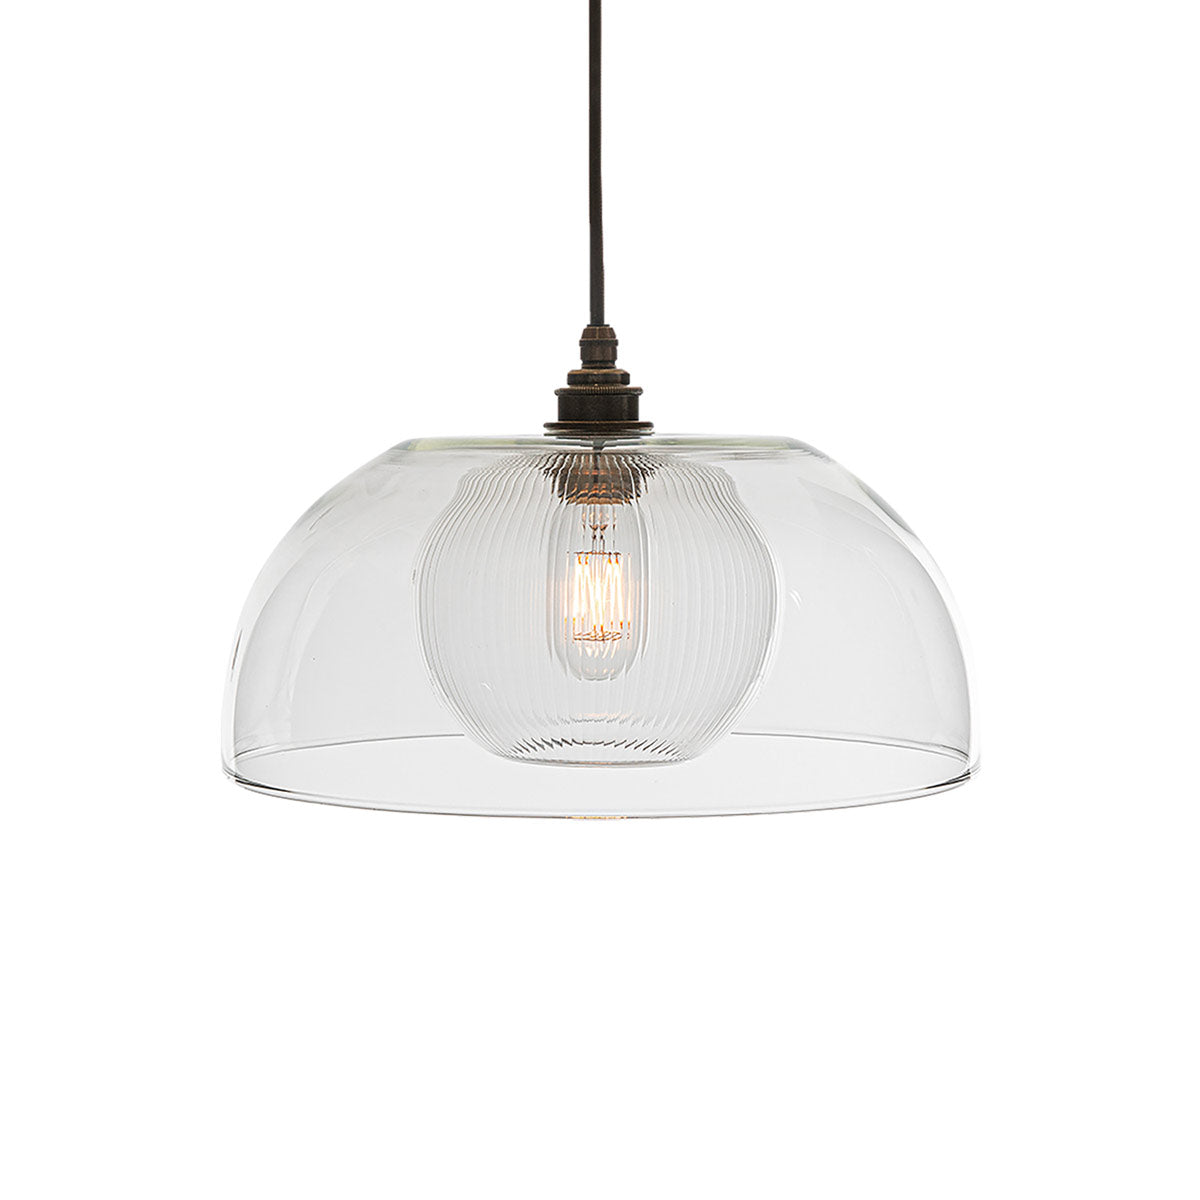 Luxury glass pendant lighting from Leverint and sold by South Charlotte Fine Lighting